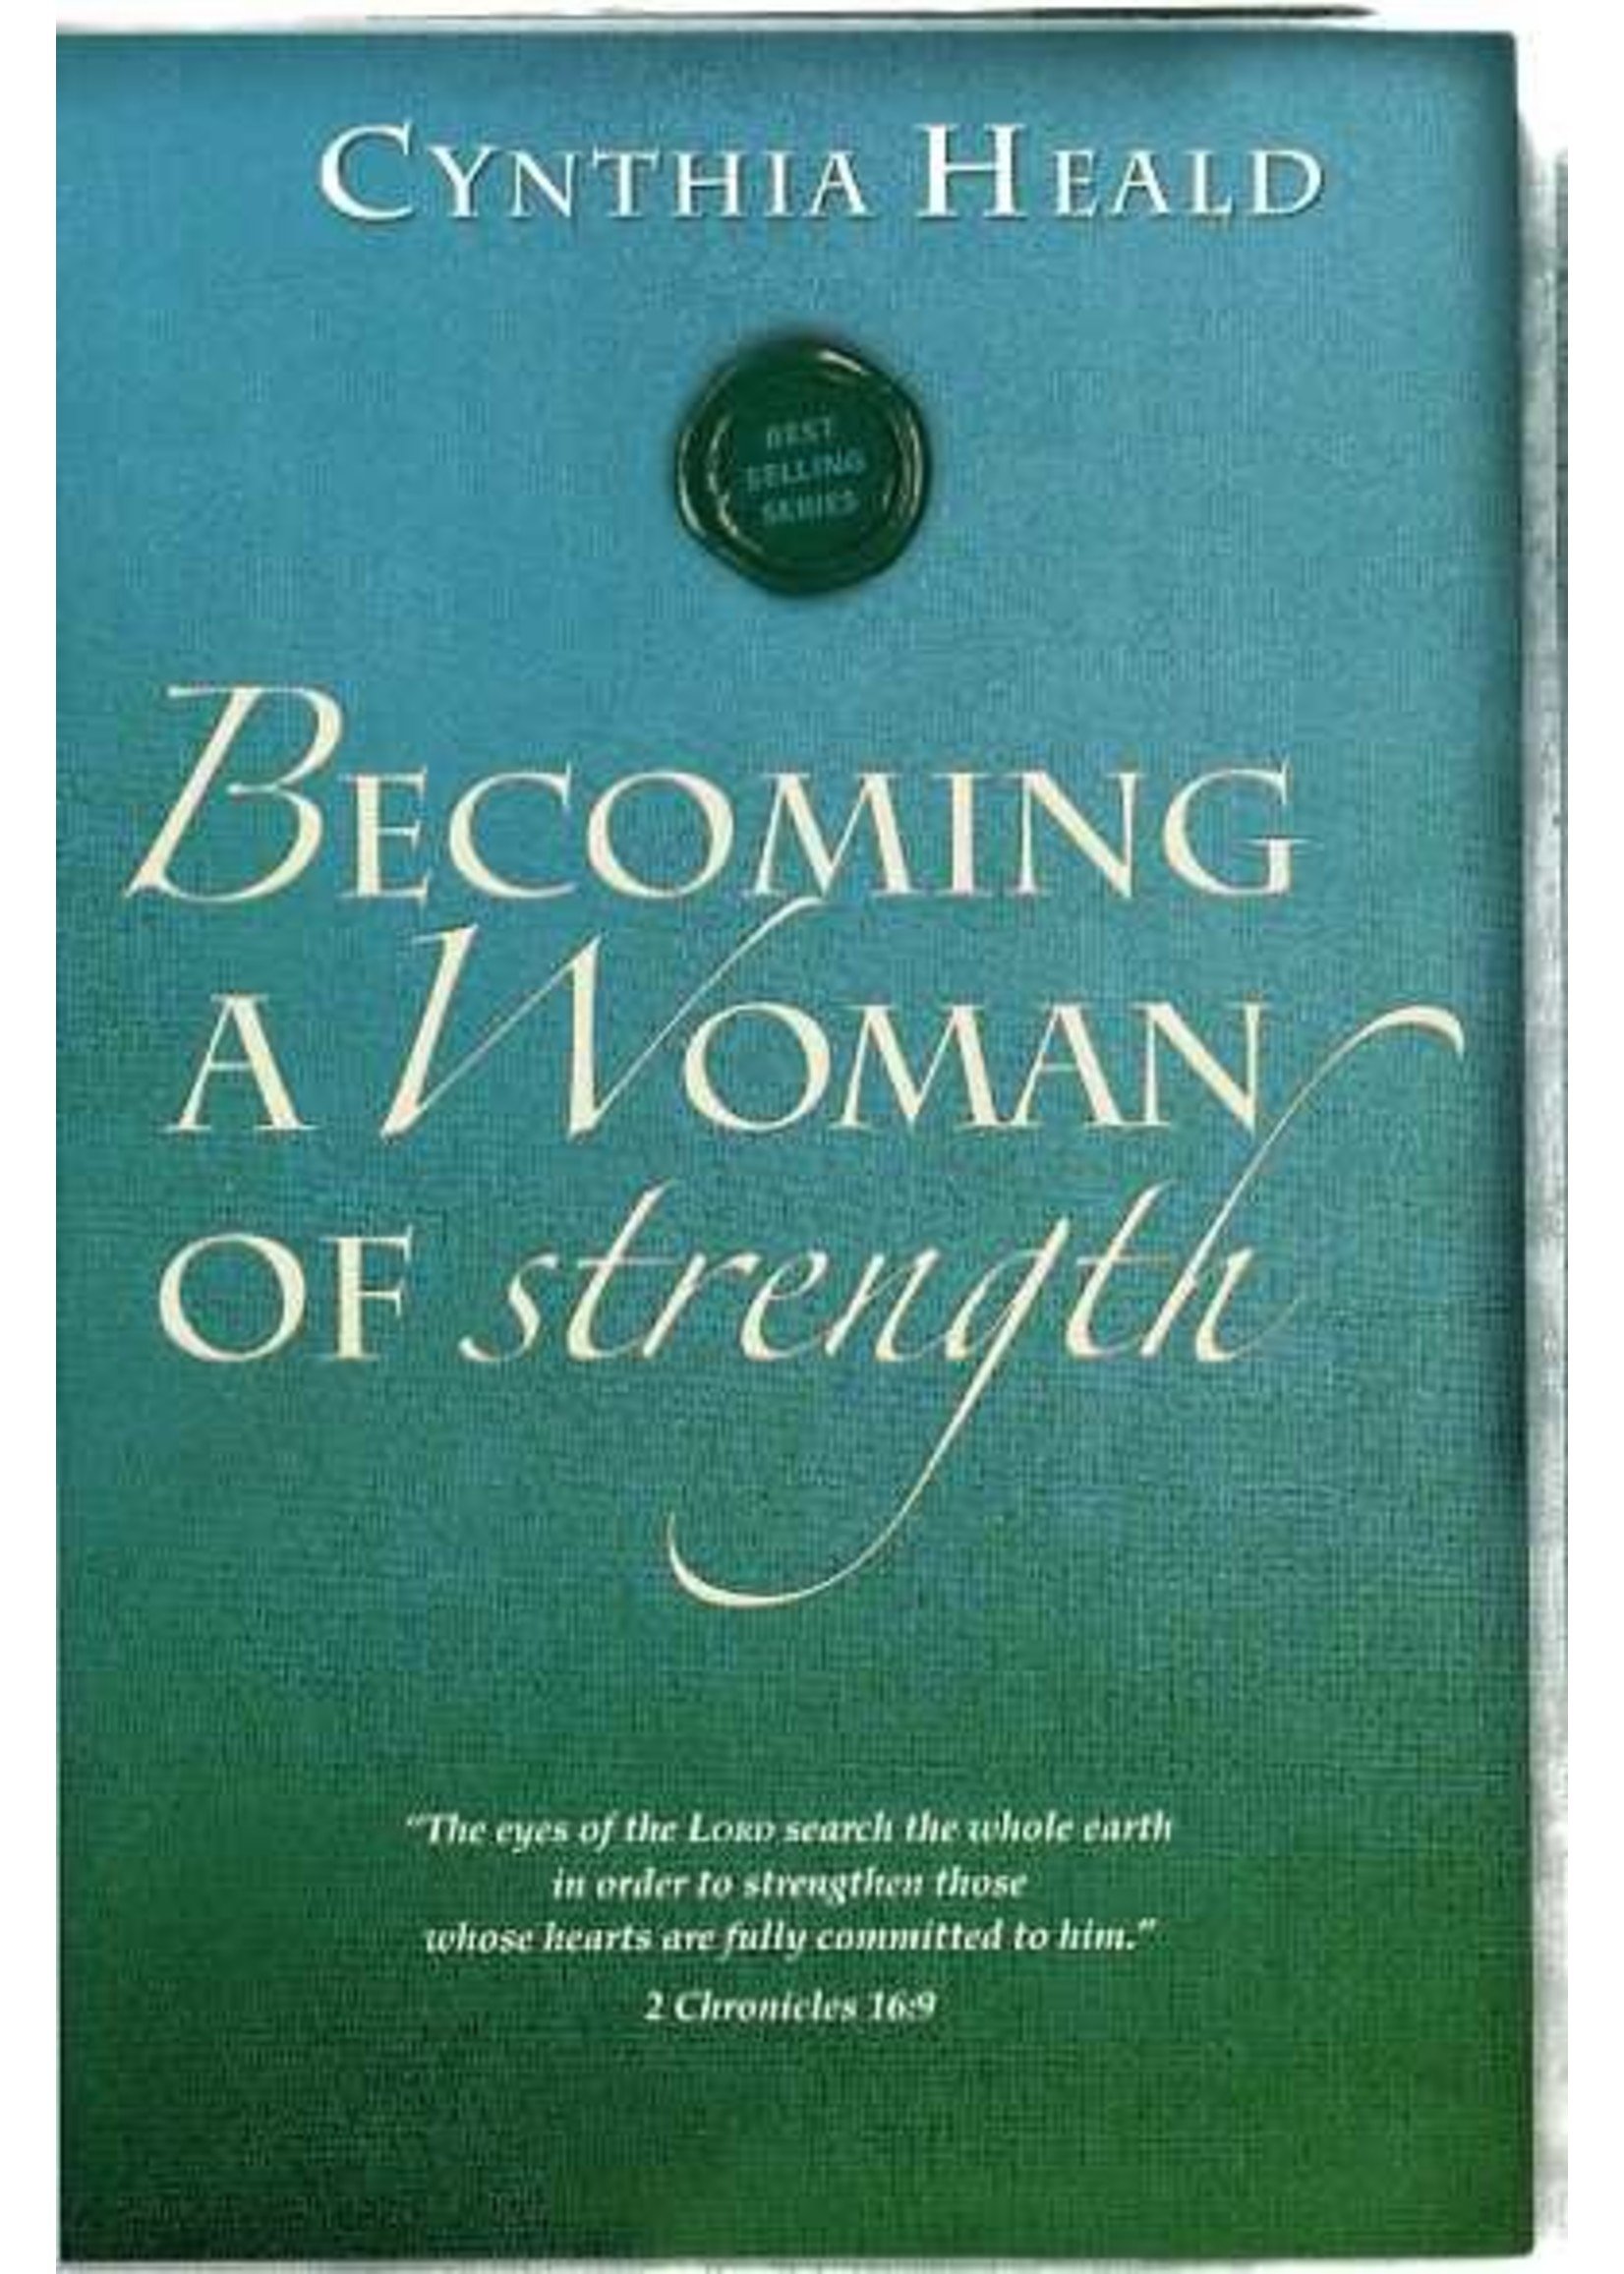 Tyndale Becoming a Woman of Strength - Cynthia Heald